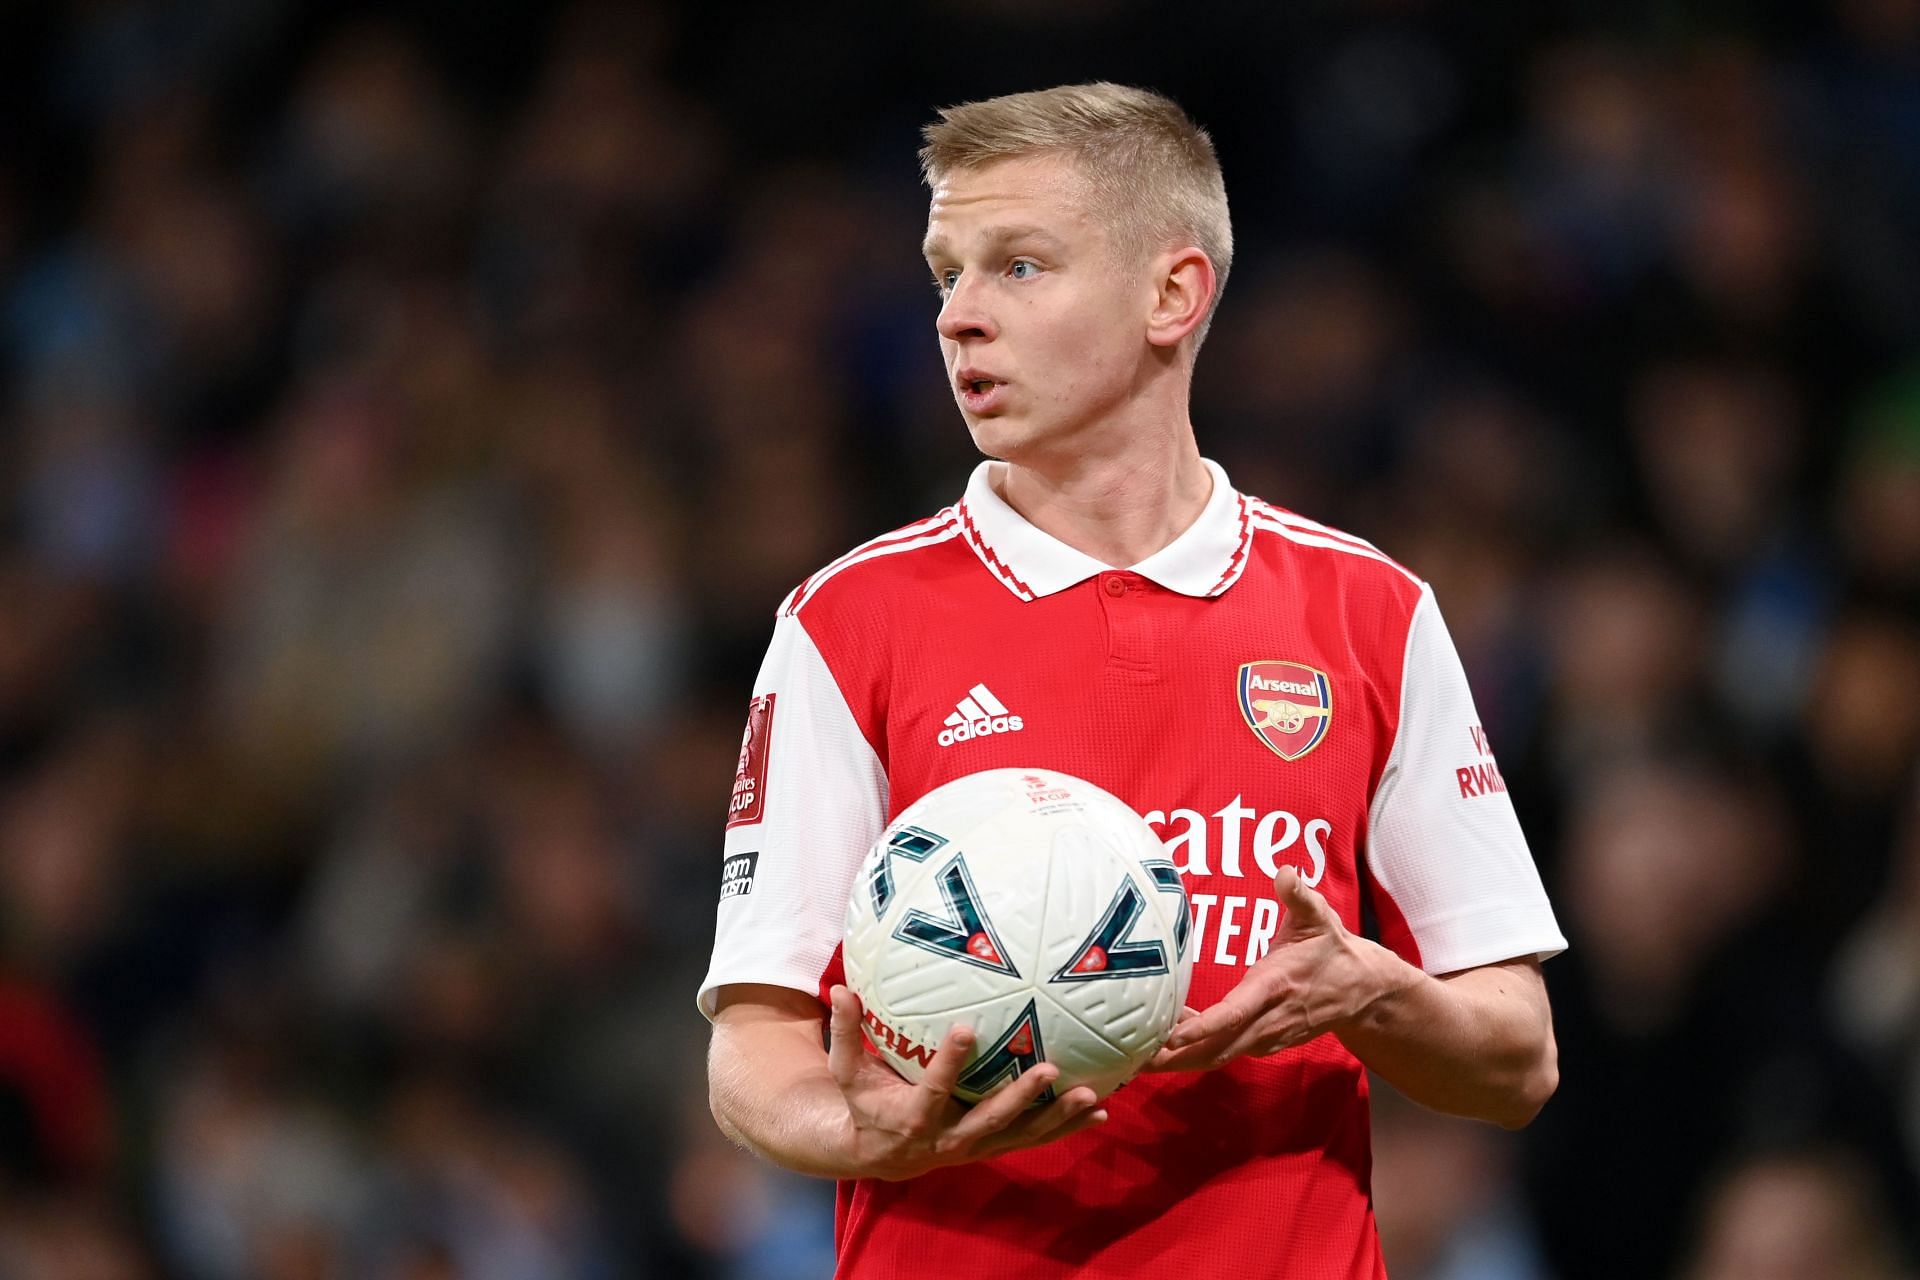 Tony Adams suggested Zinchenko (pictured) sit on the bench for the clash with City.